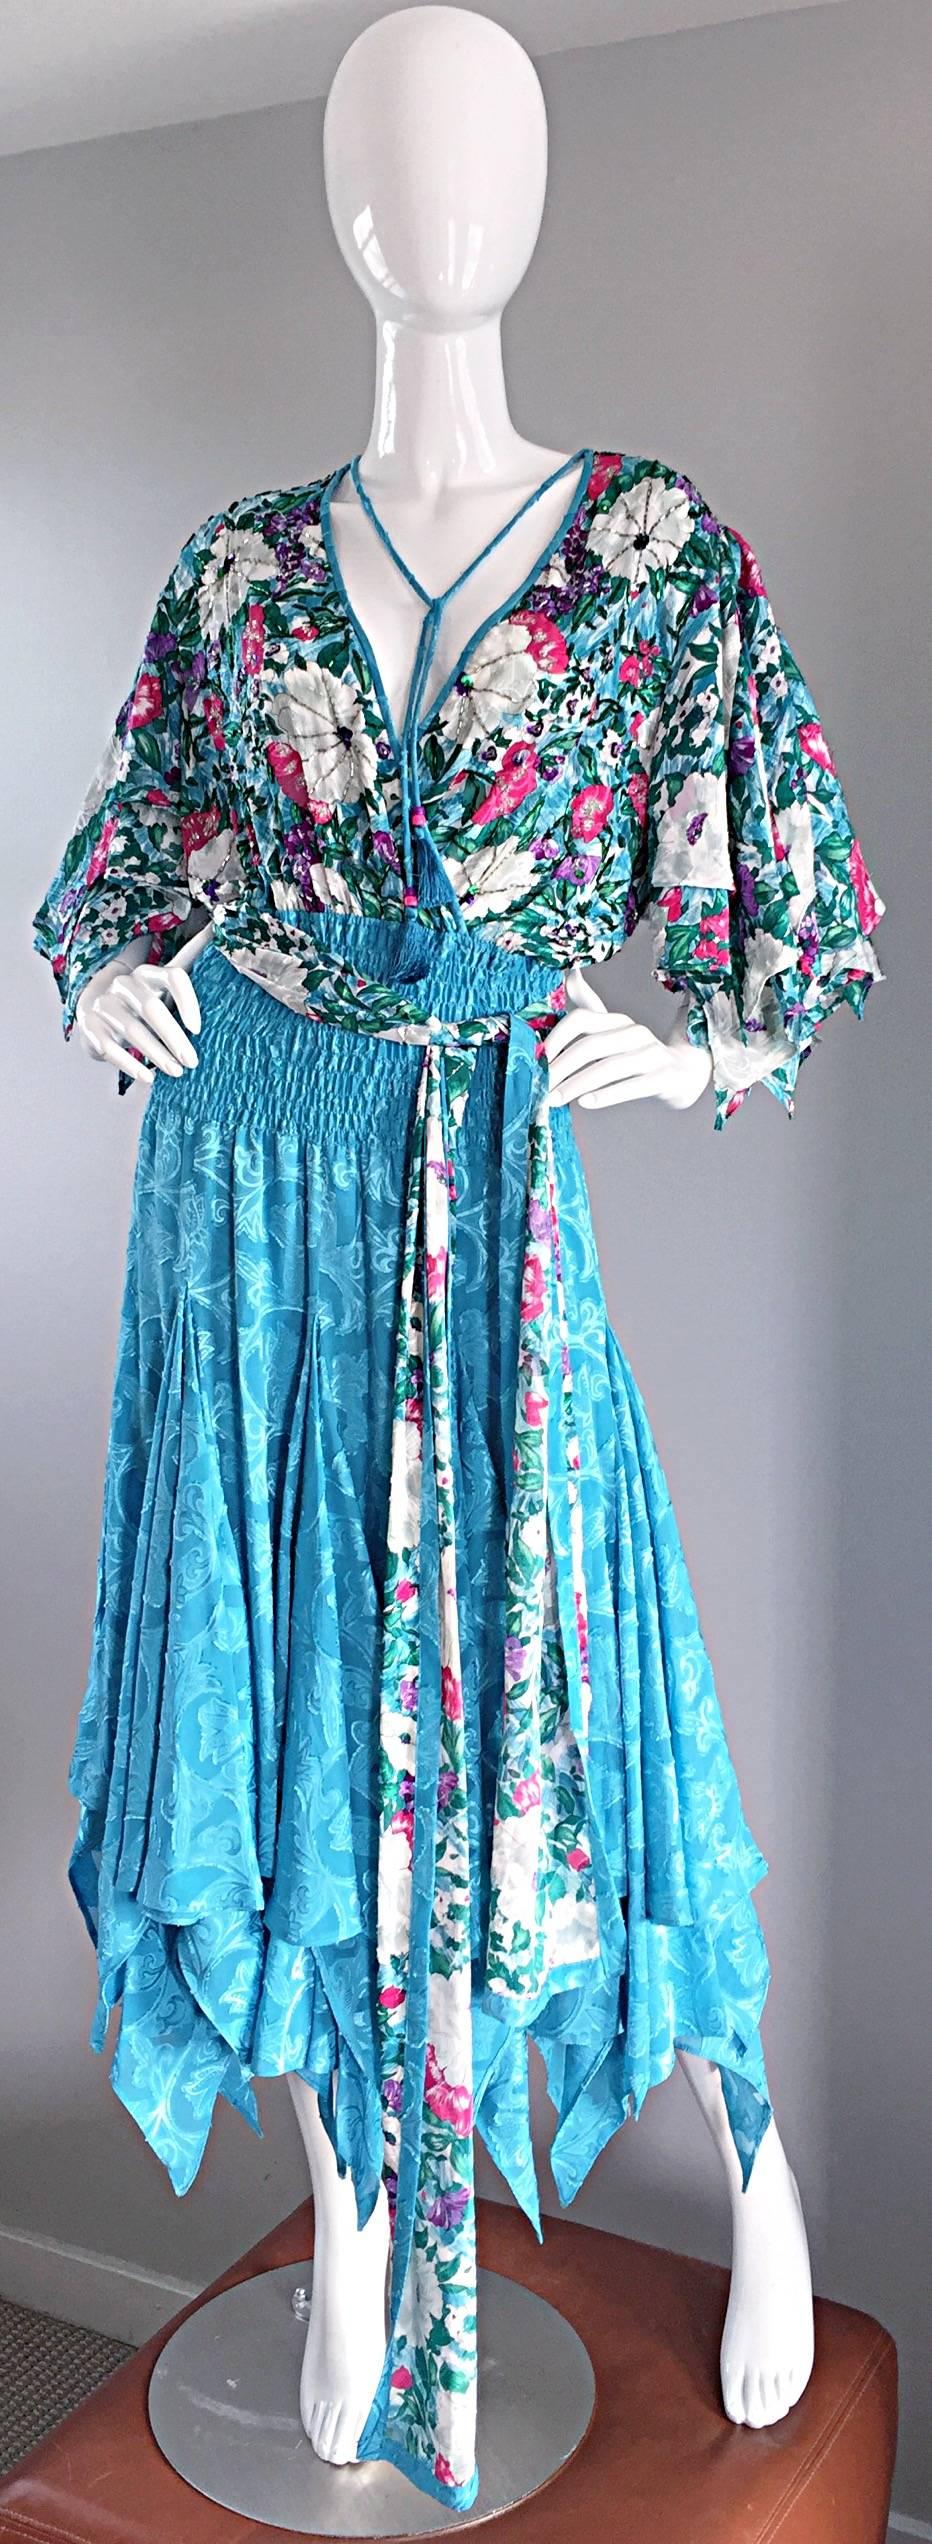 Incredible vintage DIANE FREIS ( Fres ) boho dress, and matching head scarf! Beaded throughout the flower printed bodice, with 'scarf-hem' sleeves, and skirt. So much detail on this rare find! Attached tassels at the neck, with beads at each end.